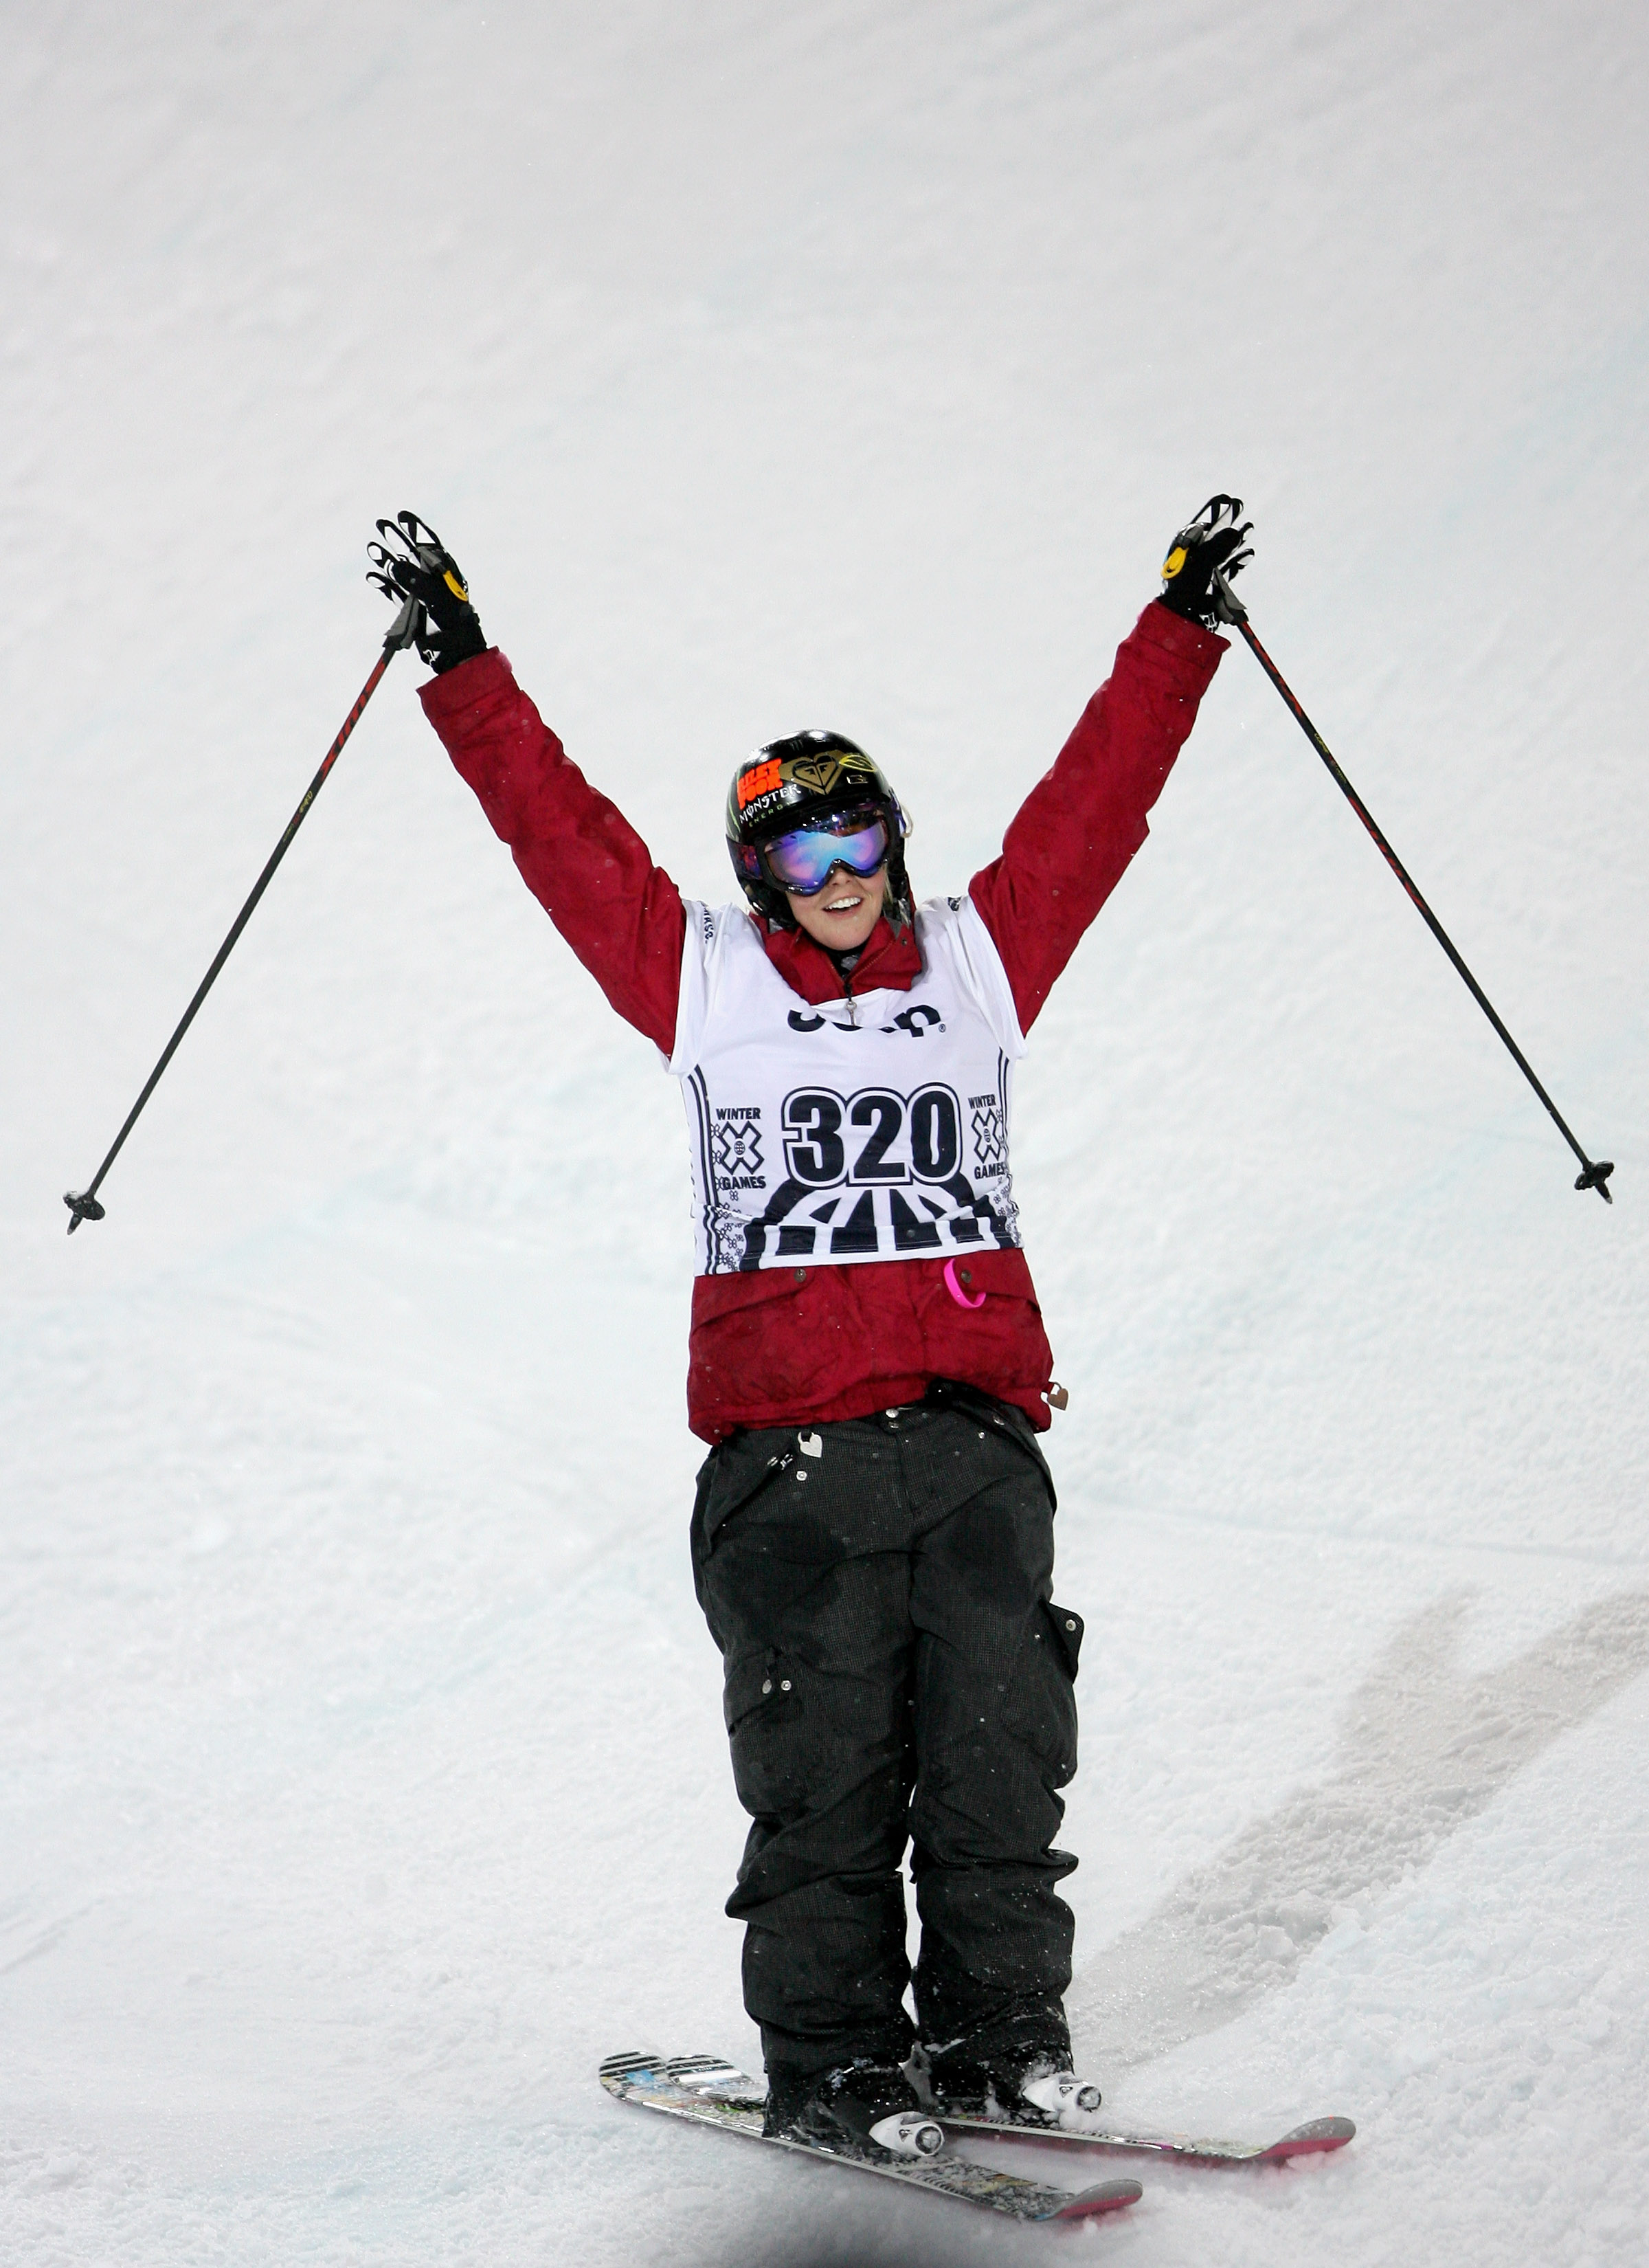 ASPEN, CO - JANUARY 23:  Sarah Burke of Whistler, Canada celebrates as she wins the gold medal in the Women's Skiing Superpipe at Winter X Games 13 on Buttermilk Mountain on January 23, 2009 in Aspen, Colorado.  (Photo by Doug Pensinger/Getty Images)